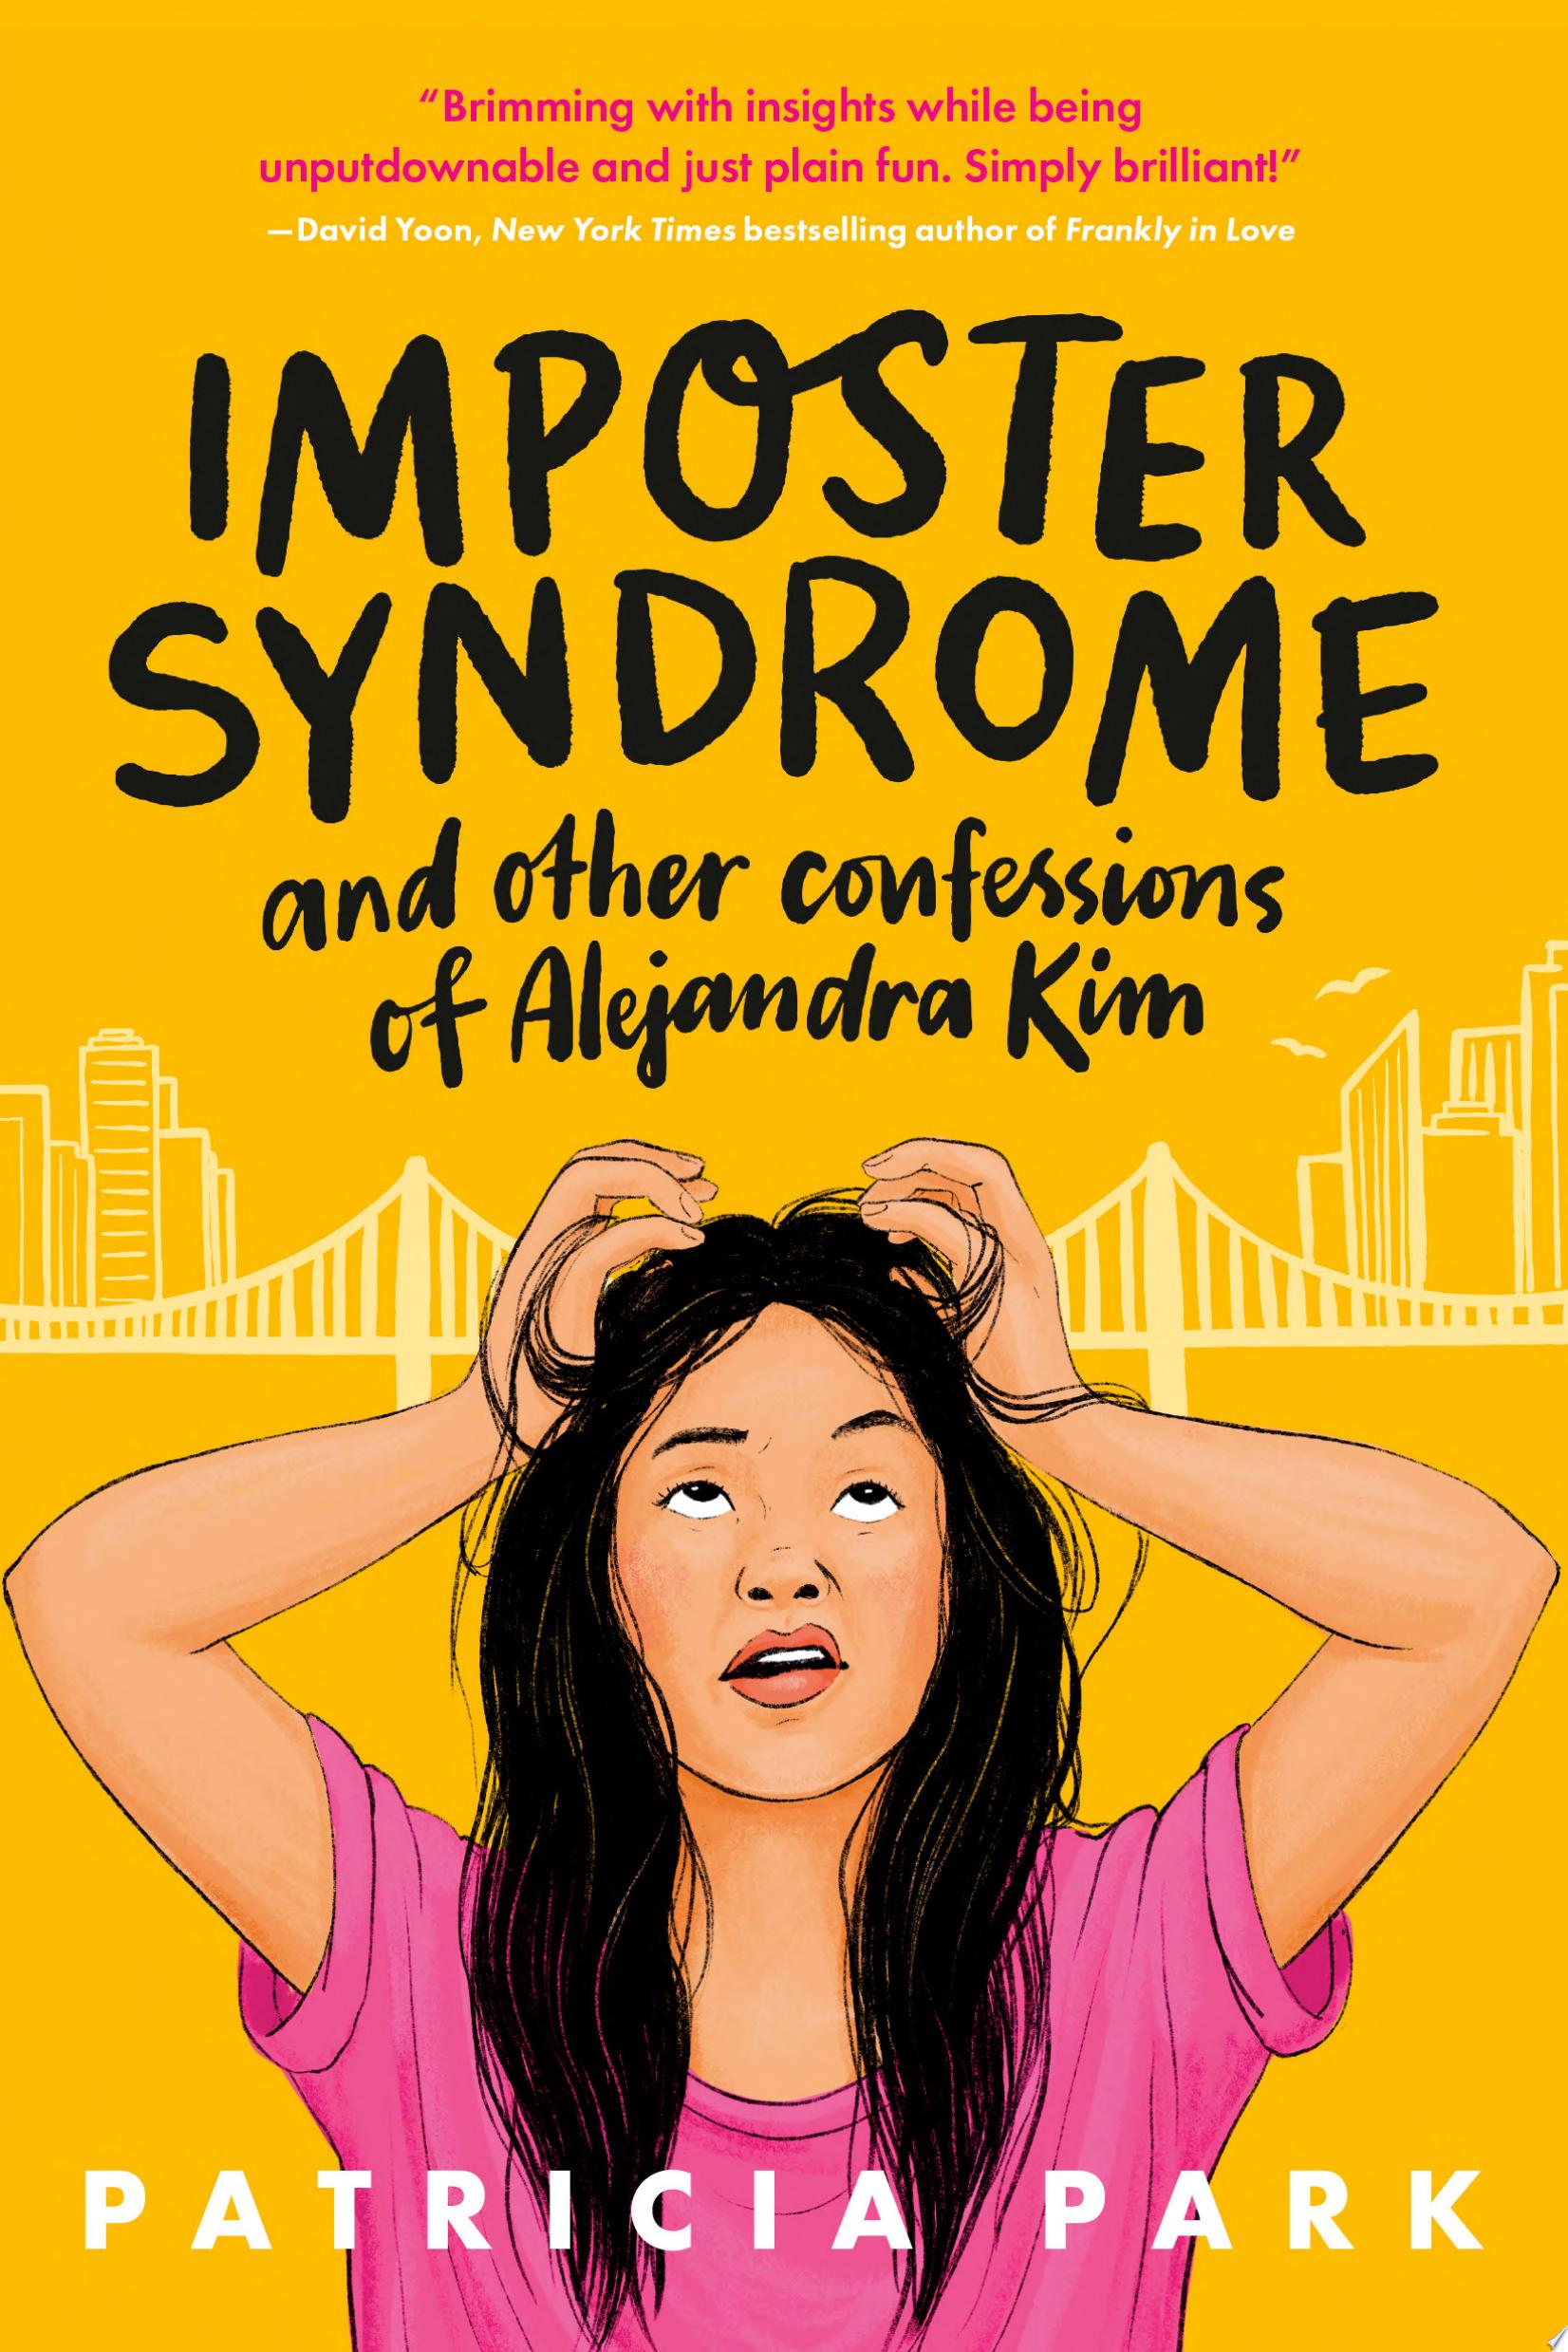 Image for "Imposter Syndrome and Other Confessions of Alejandra Kim"